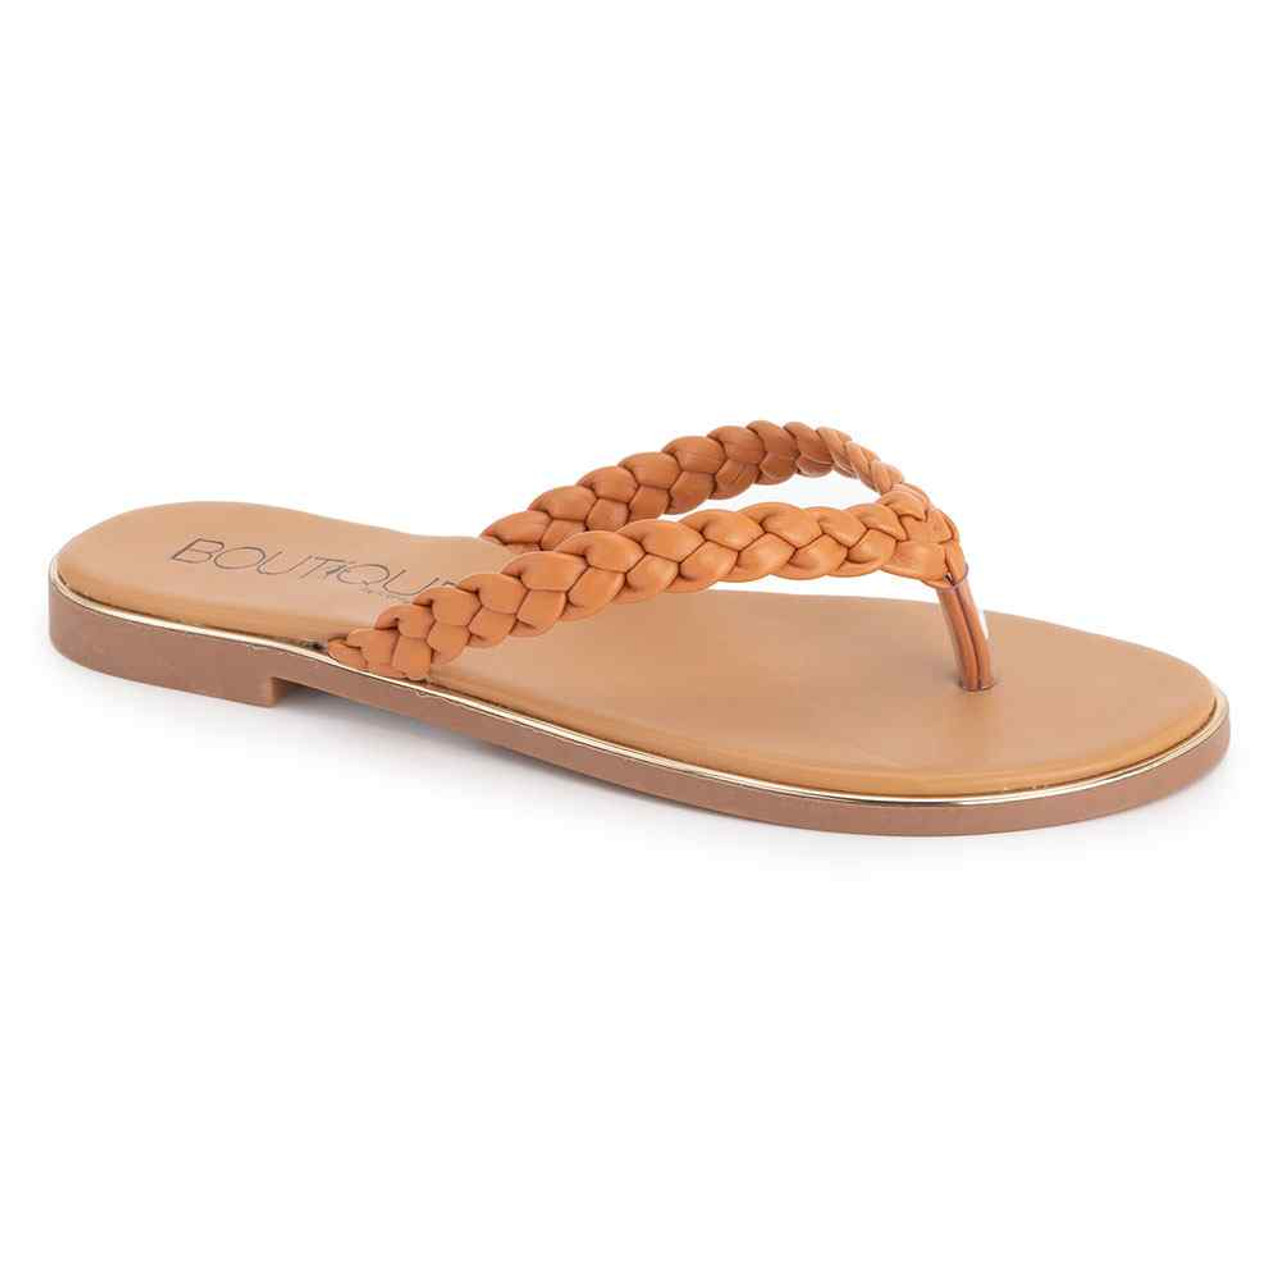 Women's Corkys Pigtail Flip Flop | Eagle Eye Outfitters